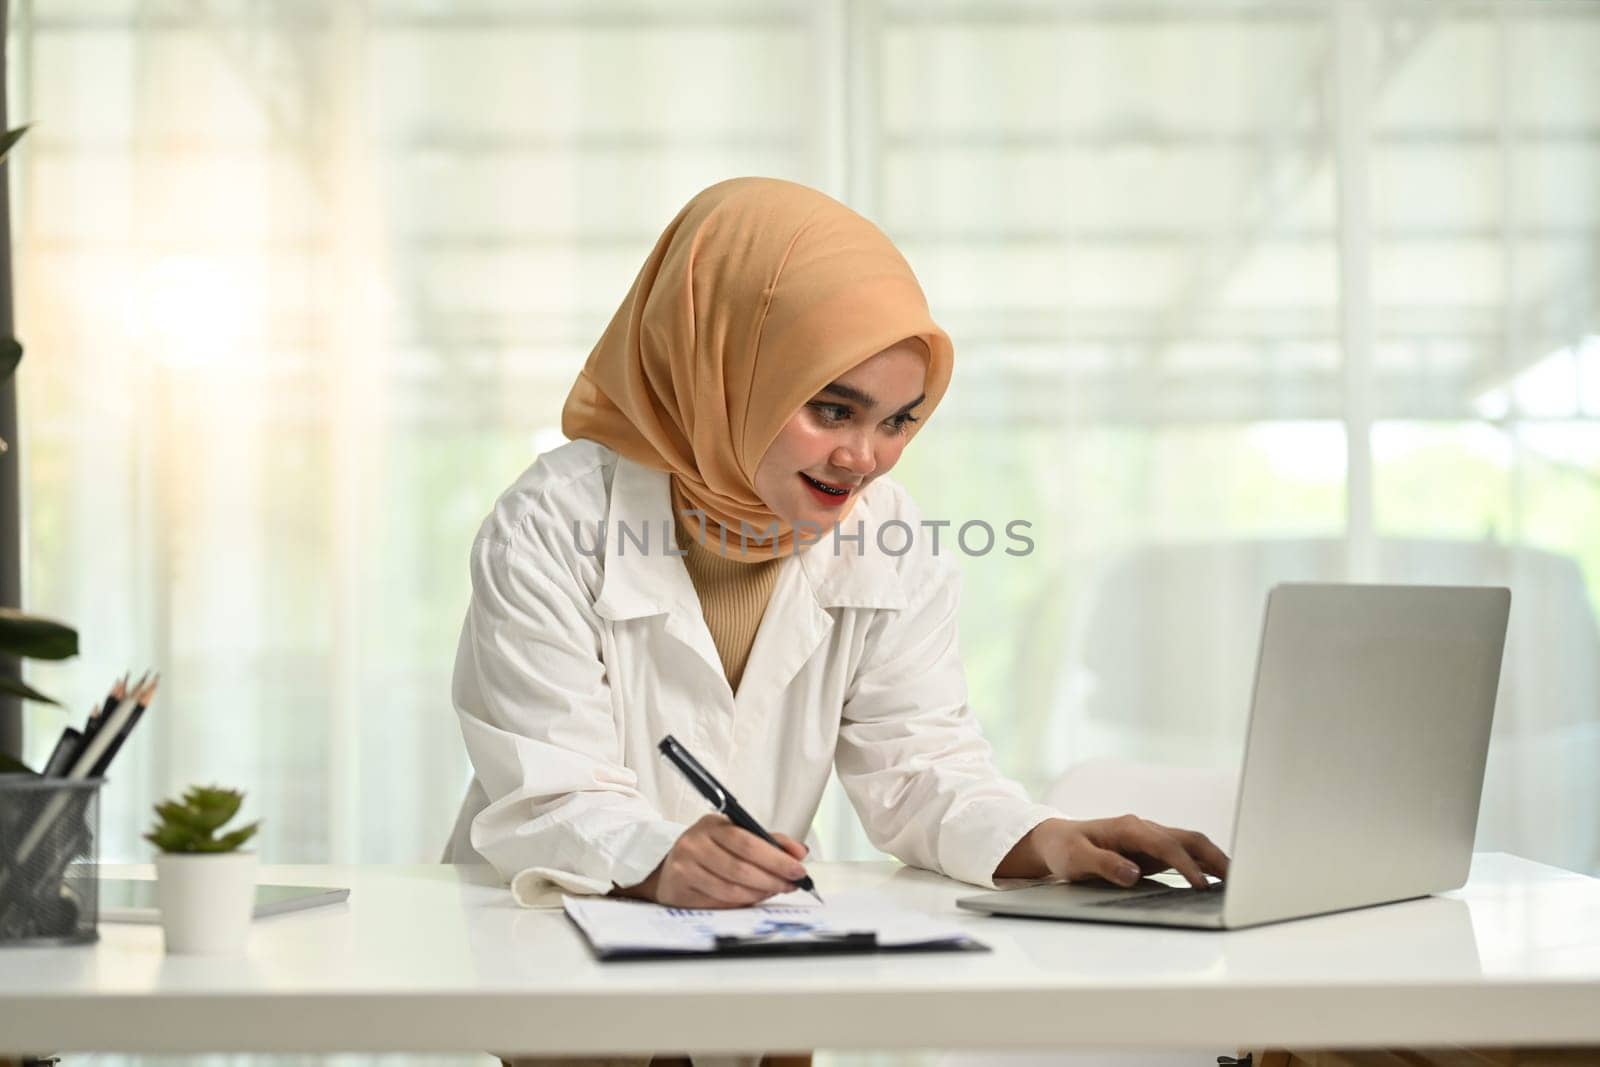 Portrait of smiling young muslim woman in hijab looking at laptop screen and writing information on document.